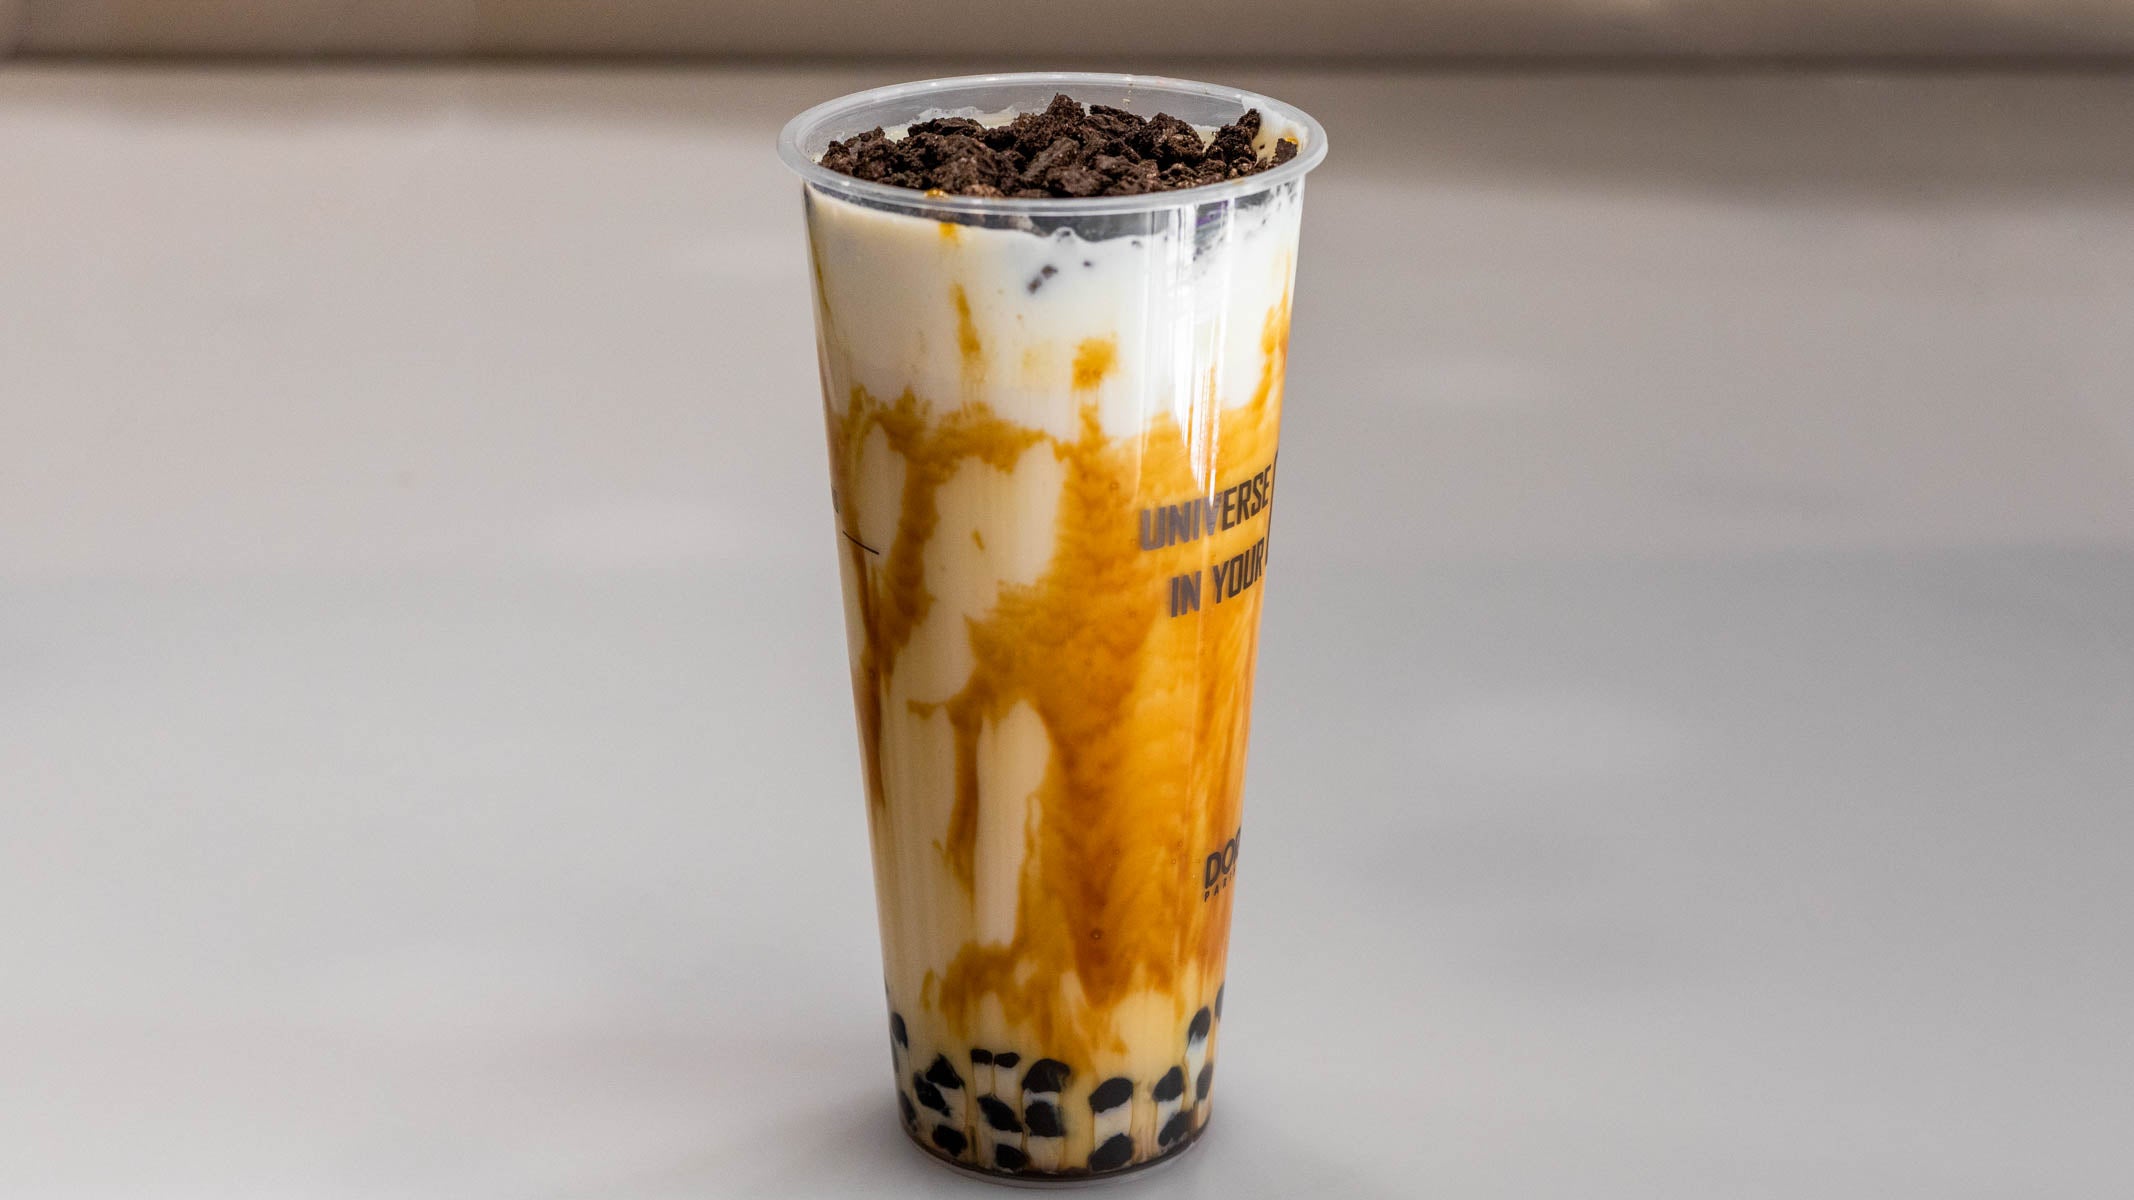 Restaurant Panda Cup - Dalston in Dalston - Delivery ...